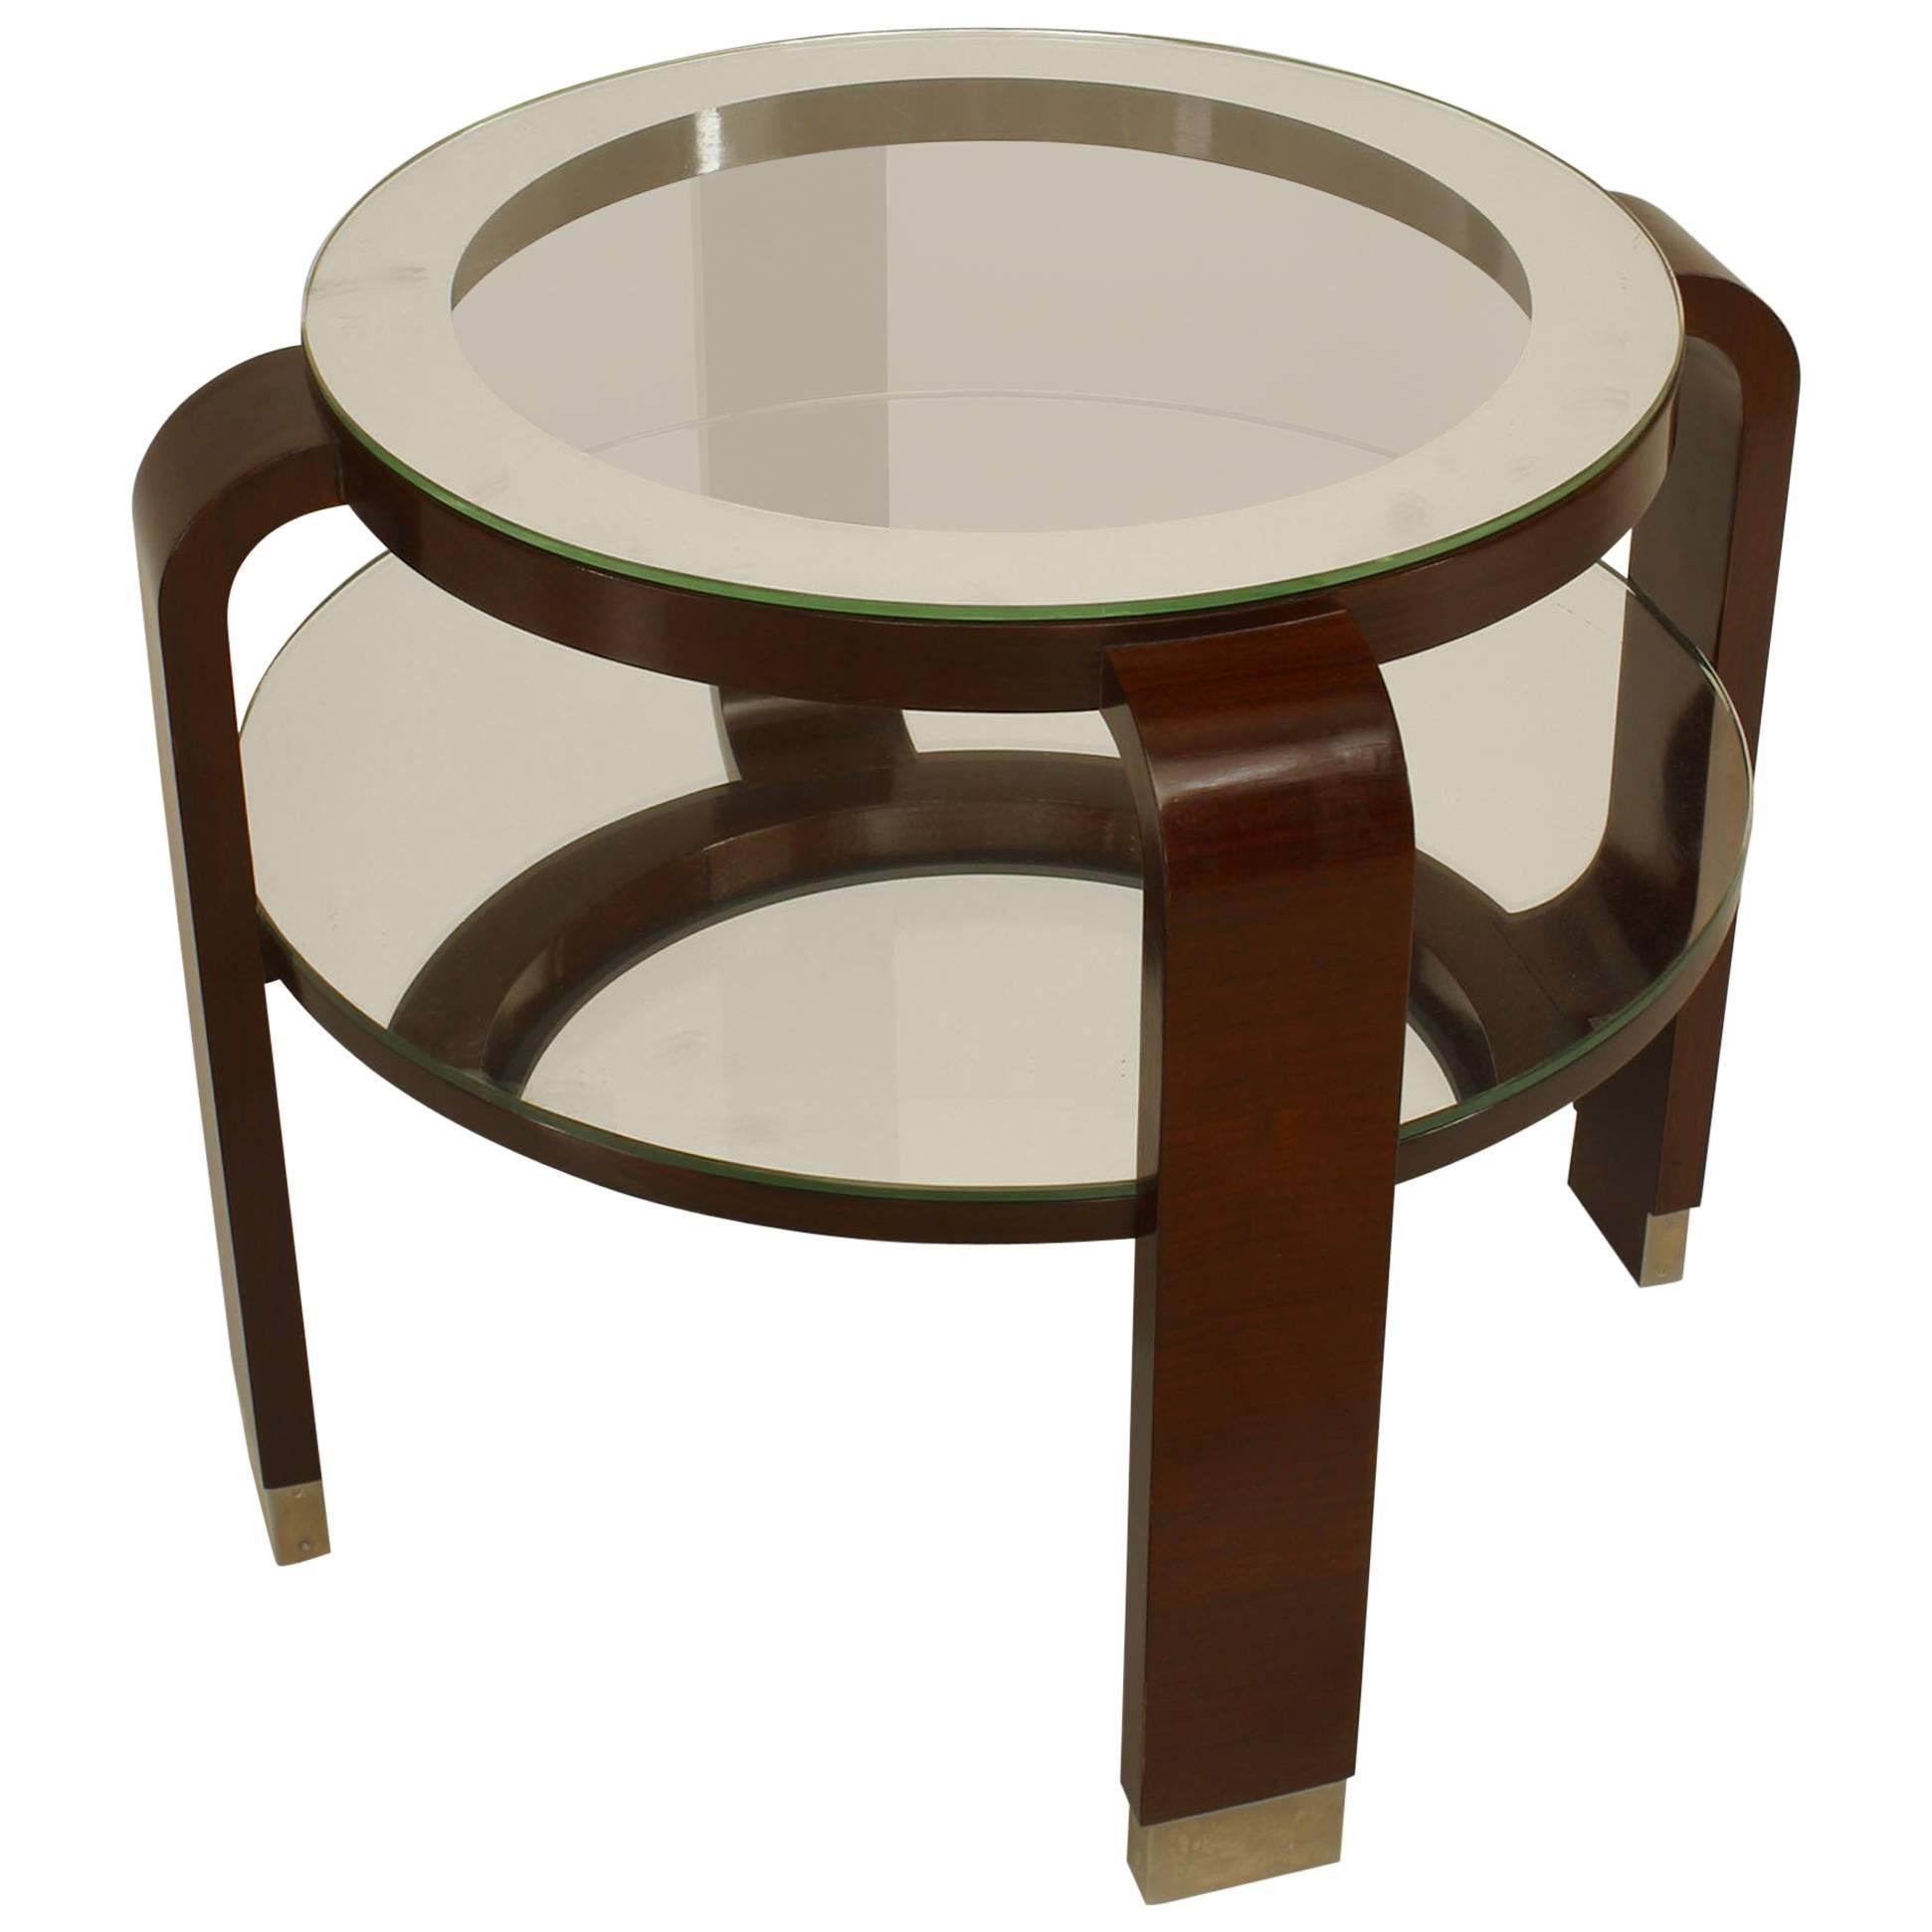 French Art Deco Mirrored Palisander End Table Attributed to Dominique